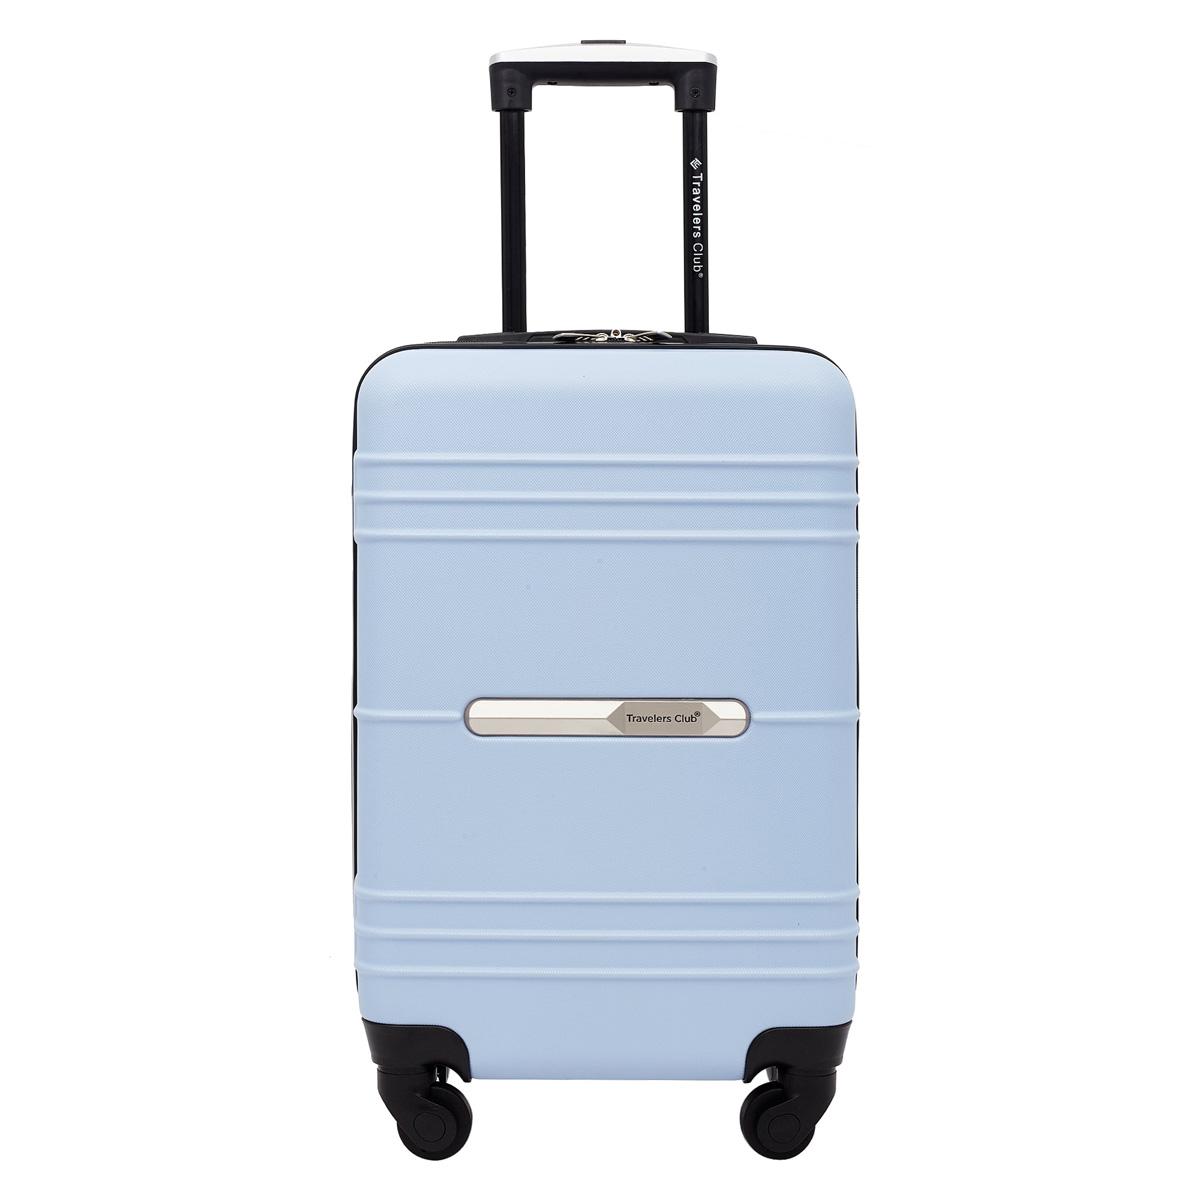 Travelers Club 20in Hardside Luggage for $44.18 Shipped